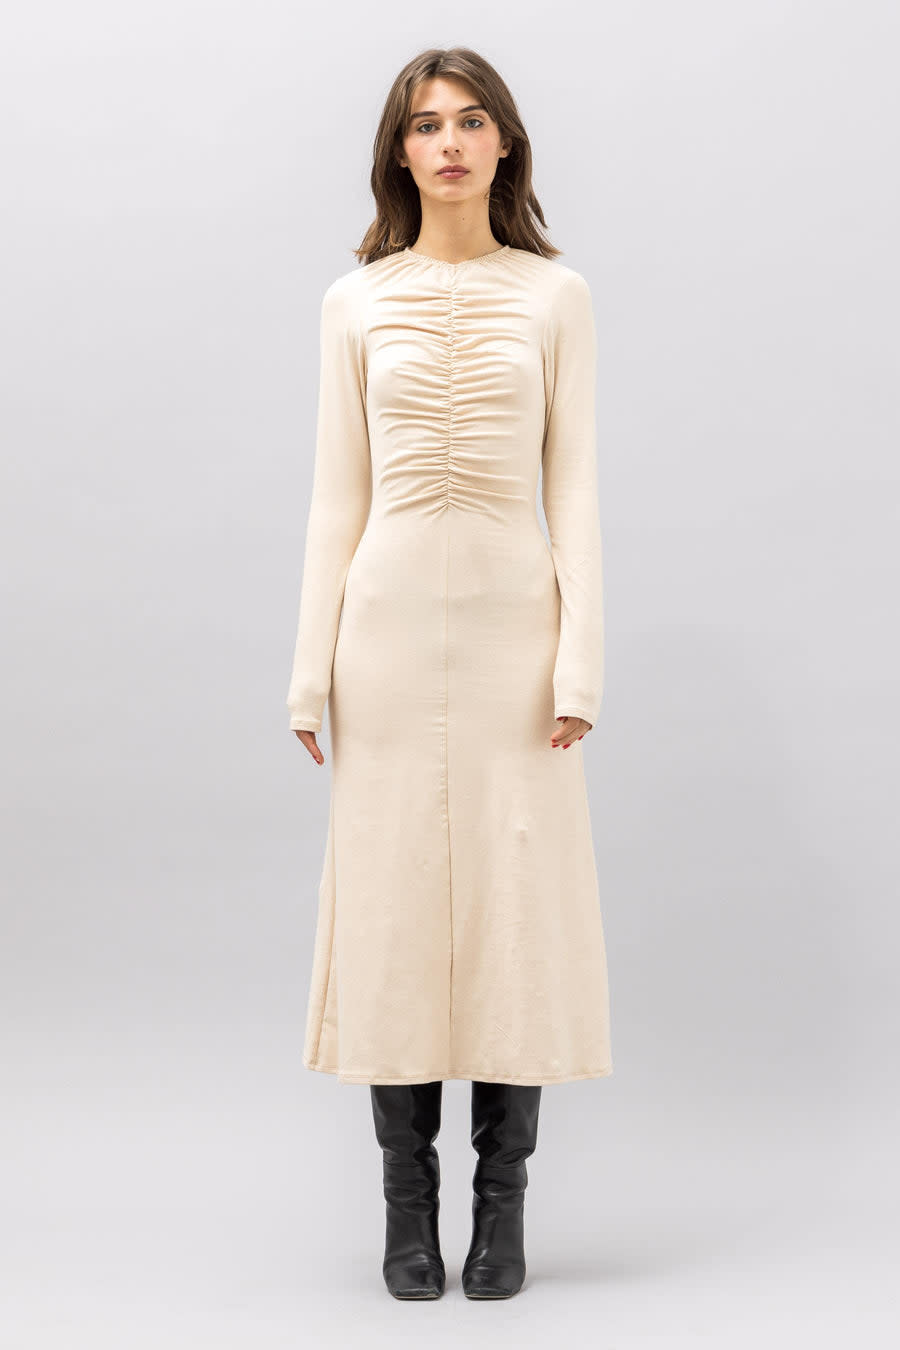 The “Totty Dress” from Toit Volant.